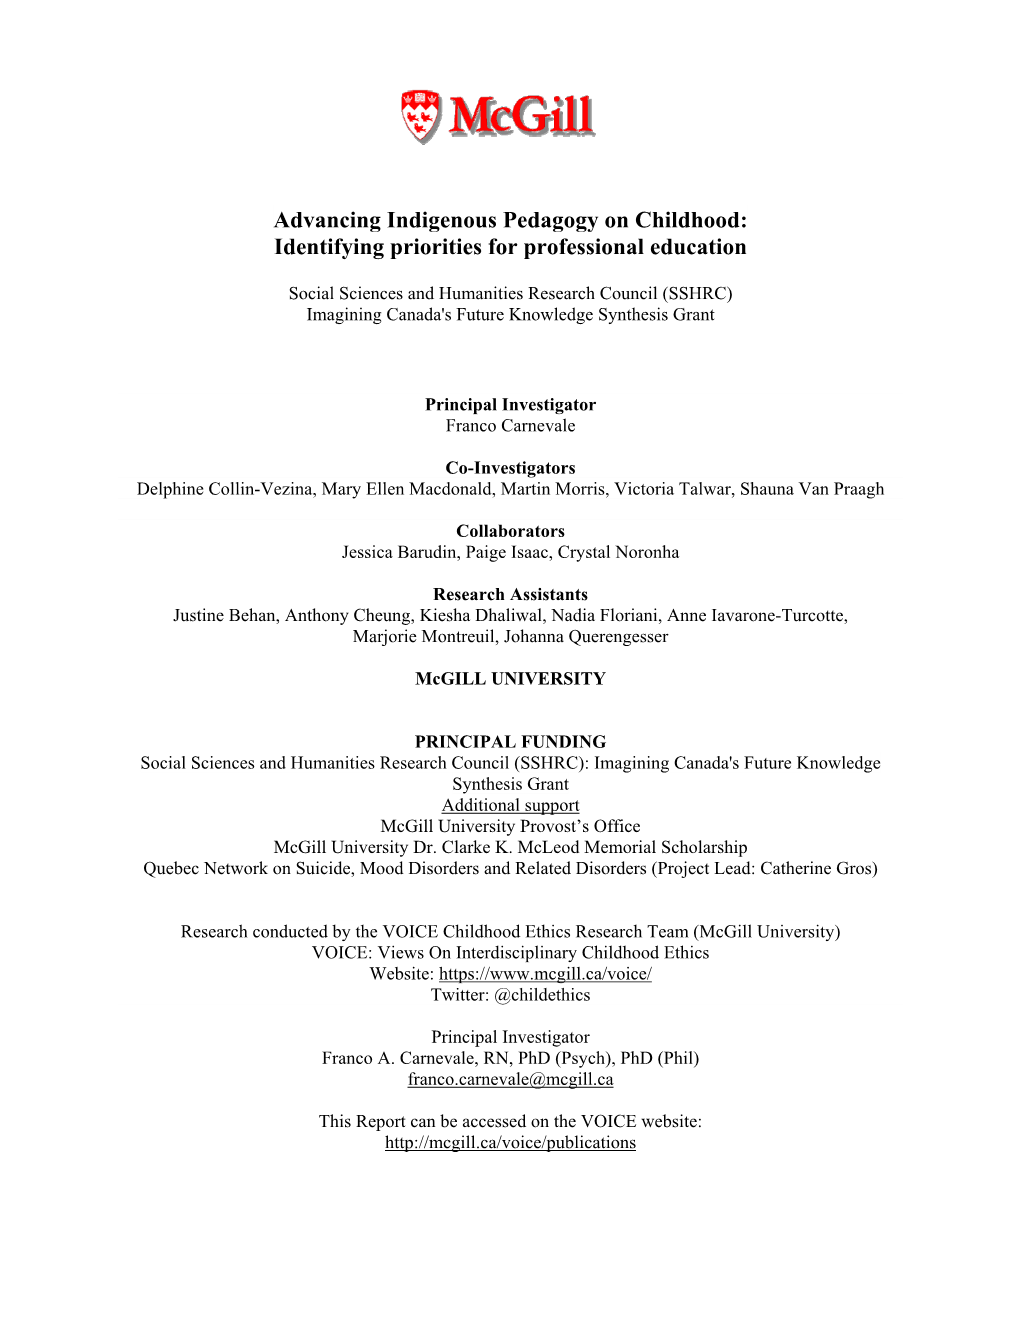 Advancing Indigenous Pedagogy on Childhood: Identifying Priorities for Professional Education